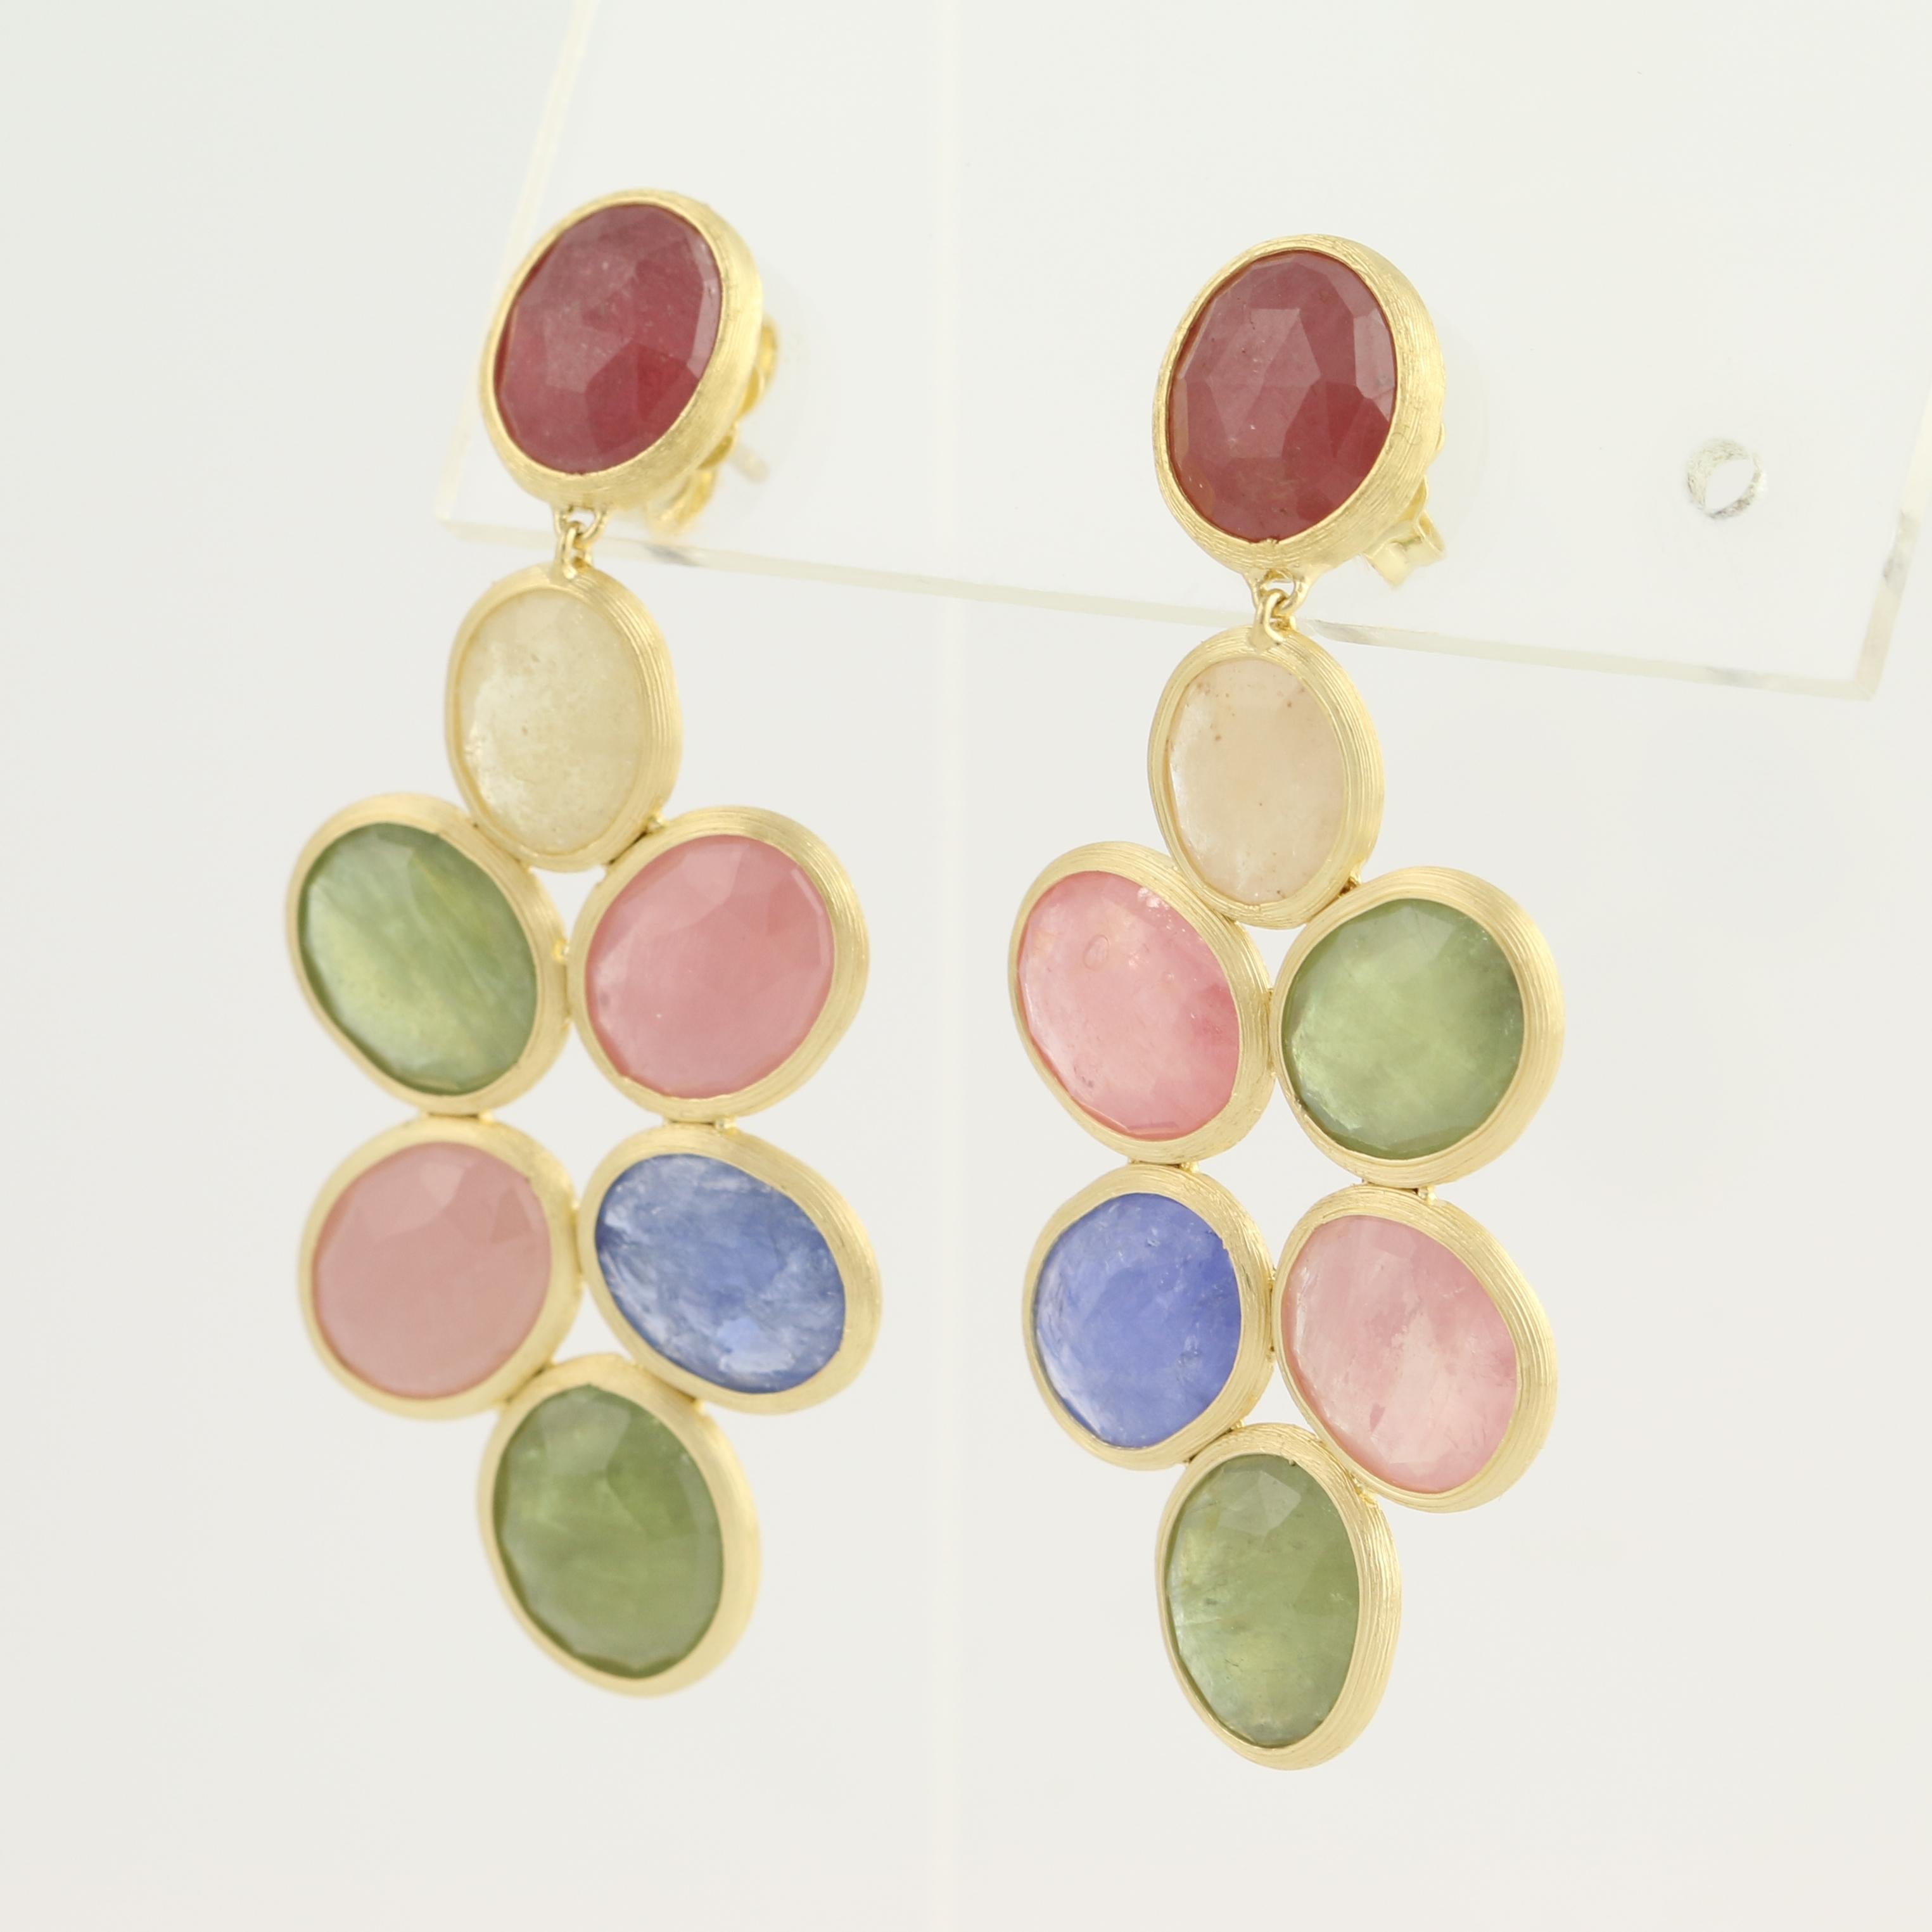 These designer earrings would make a fabulous gift for someone celebrating a birthday, anniversary, or milestone life event! Part of Marco Bicego’s Siviglia Collection, these earrings feature multicolored natural sapphires in clusters of high purity